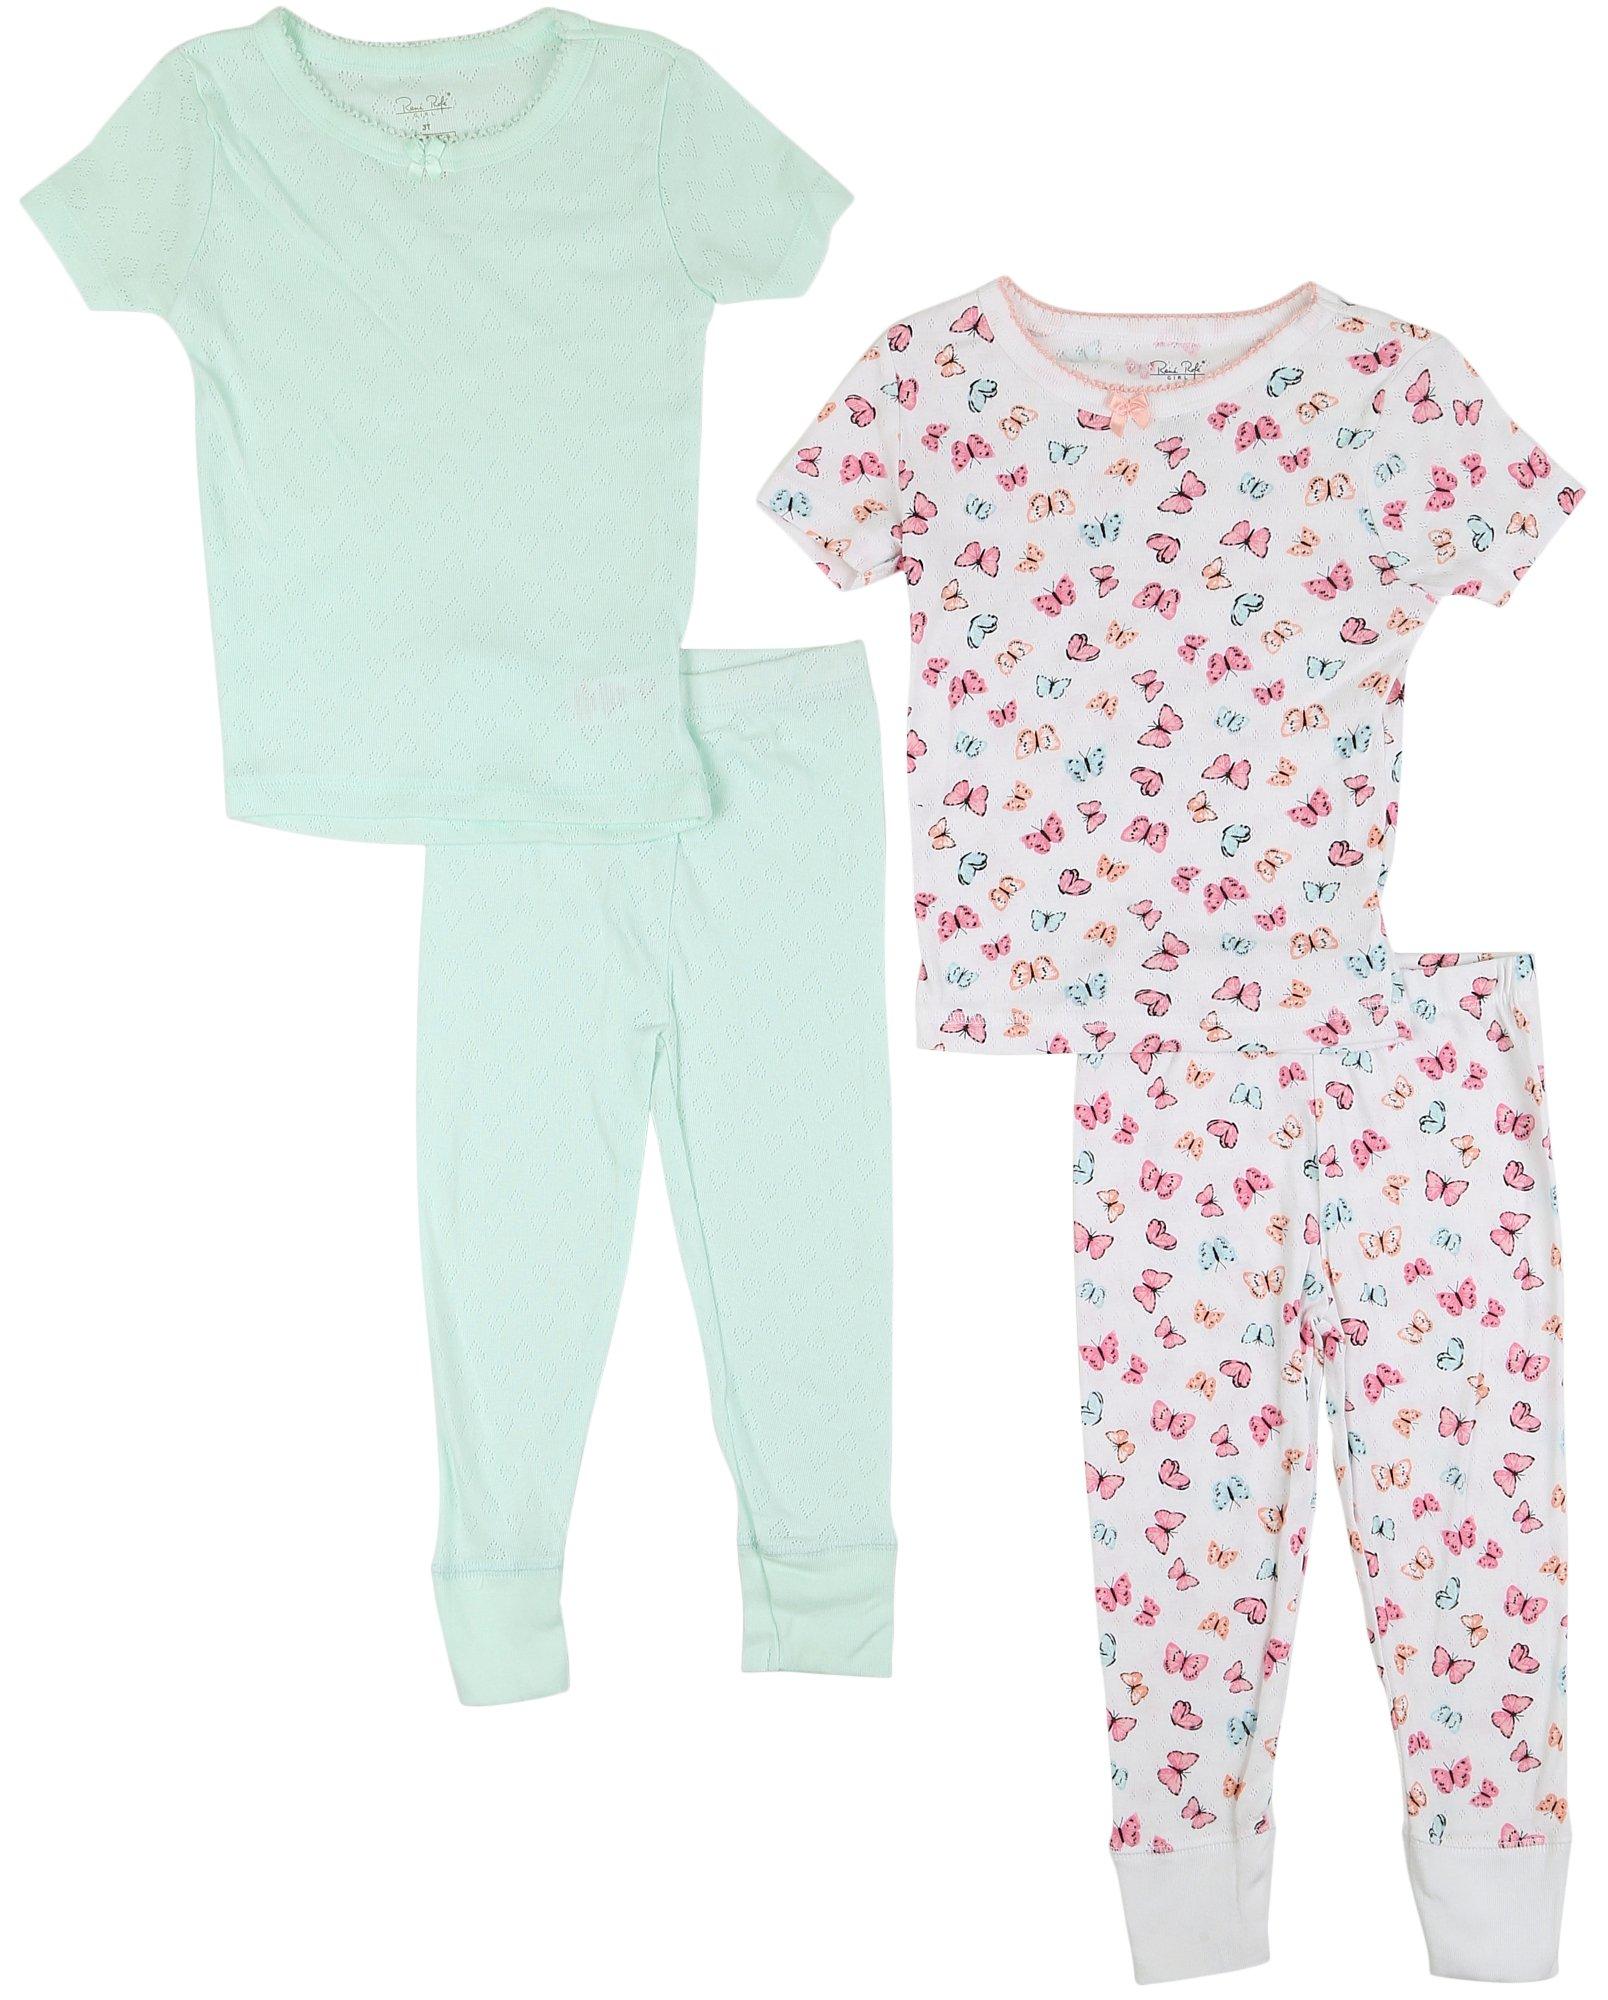 Toddler Girls 4-pc. Butterfly/Solid Tops/Pants Set